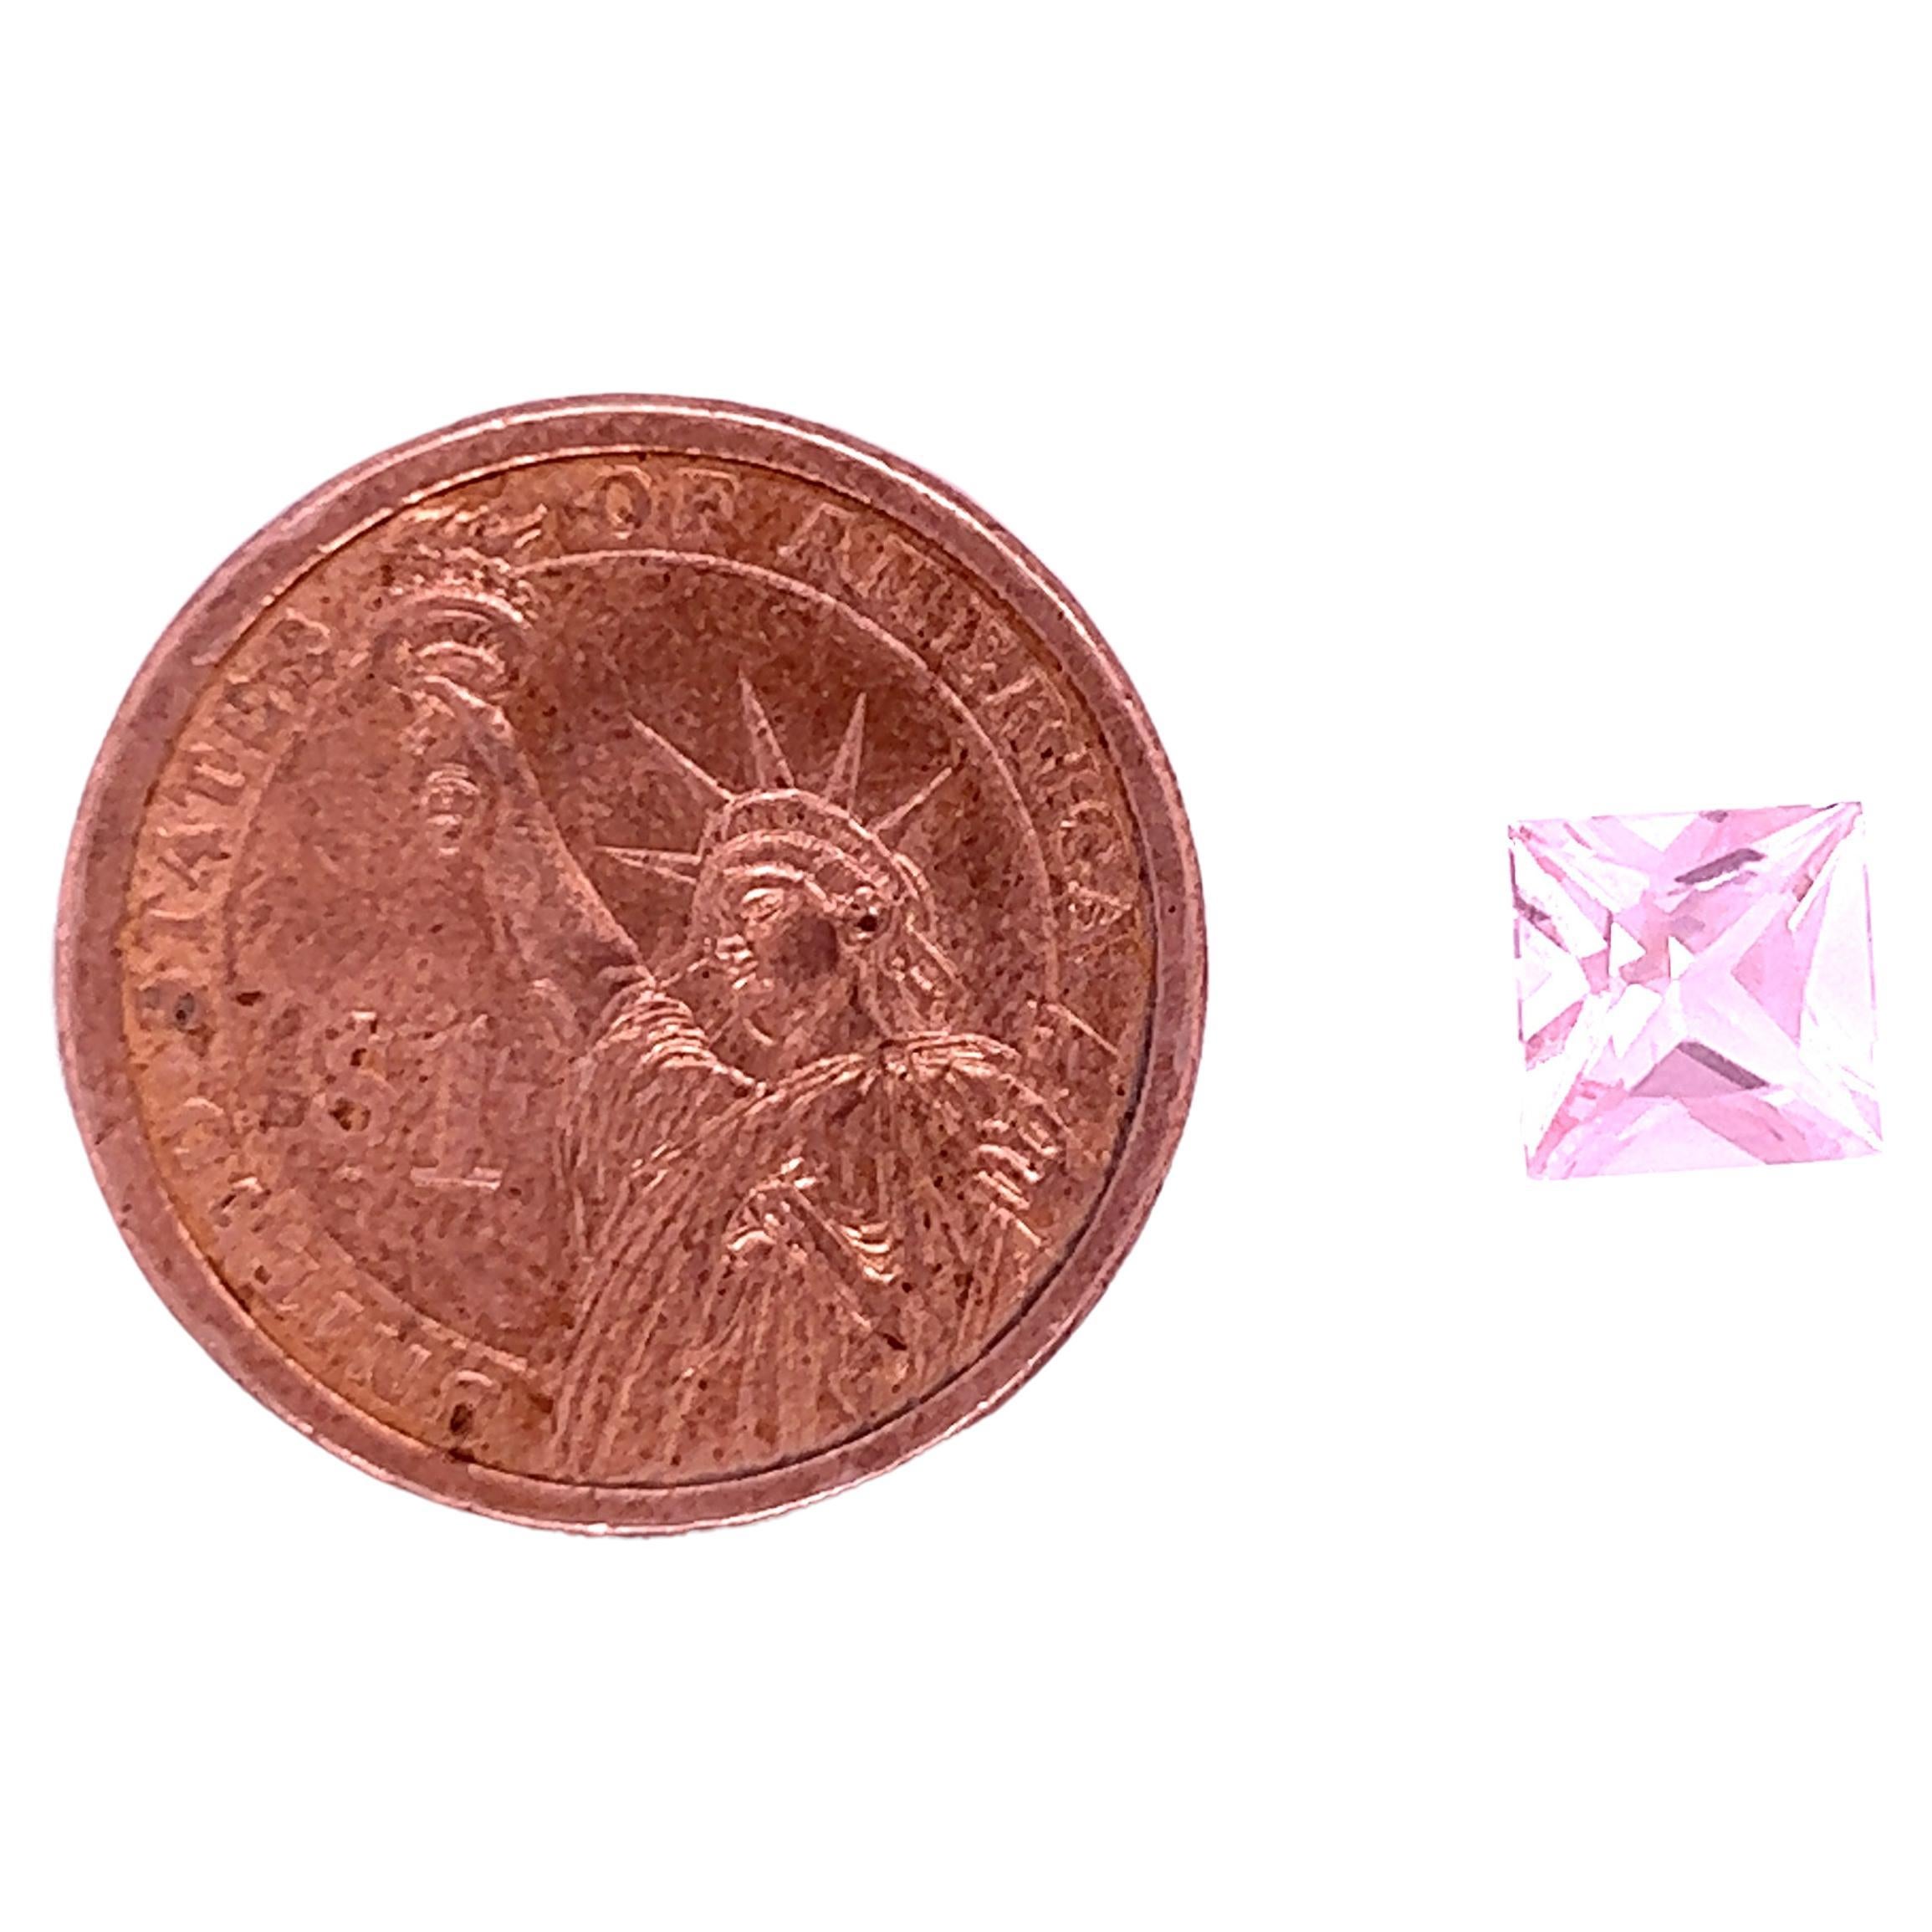 SKU - 50015
Stone : Natural pink morganite
Shape : Octagon
Clarity -  Eye clean
Grade -  AAA
Weight - 3.05 Cts
Length * Width * Height - 8.1*8.1*5.4
Price - $ 890

Morganite is a gemstone that brings the prism of love in all its incarnations.